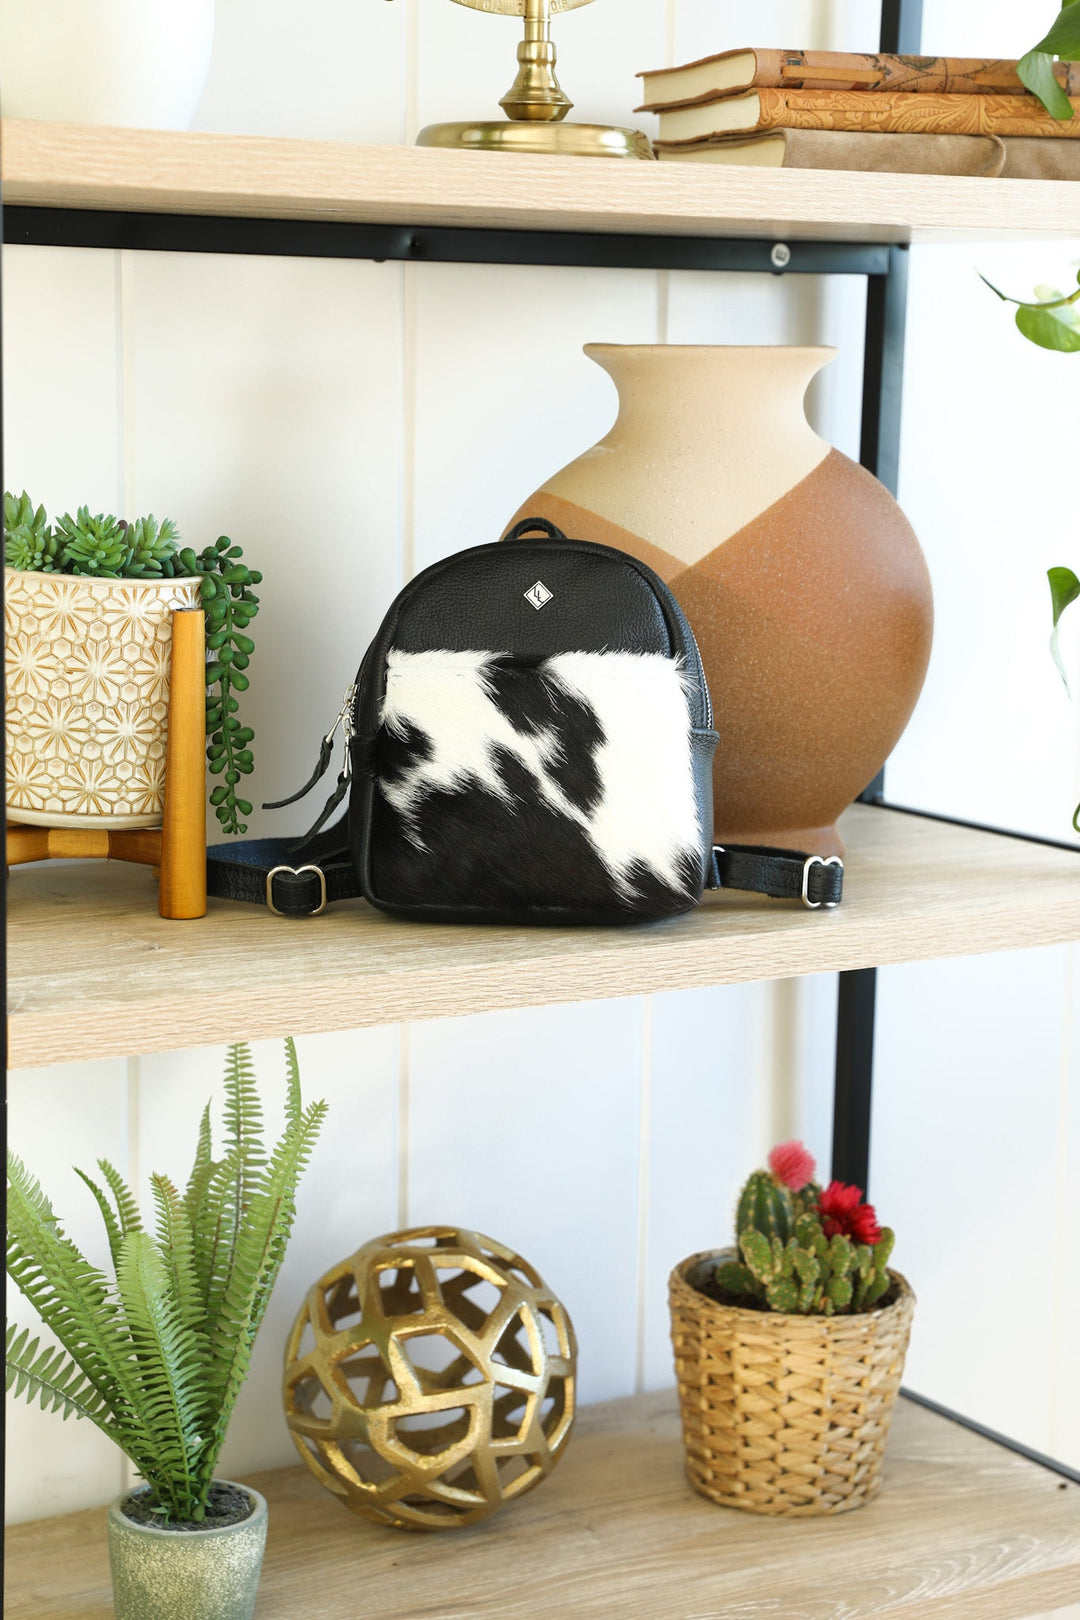 The Winnie Backpack by Lifetime Leather Co